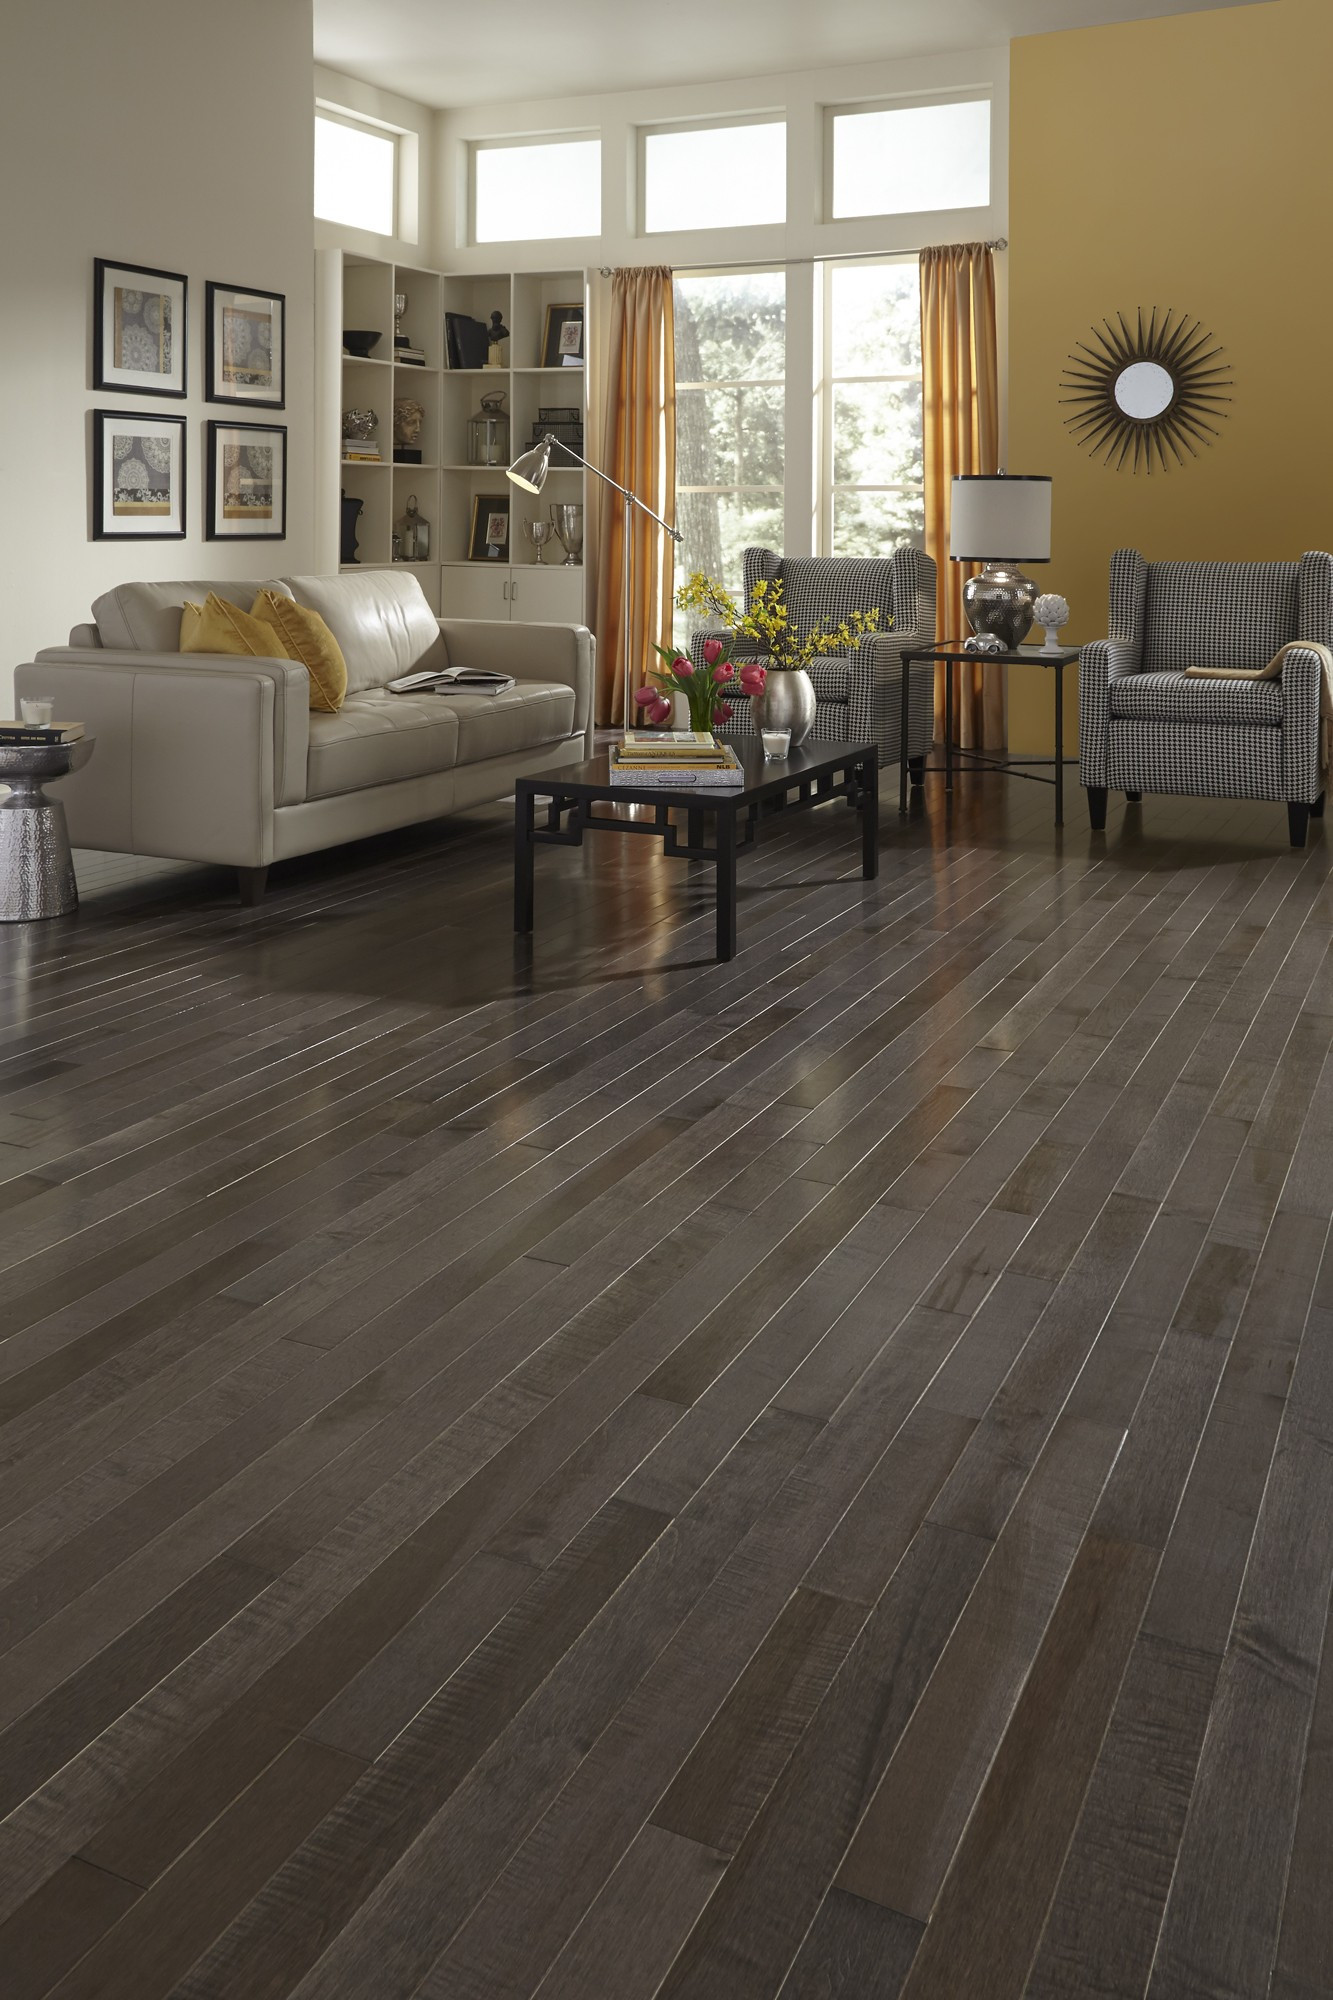 26 attractive Average Cost to Replace Hardwood Floors 2024 free download average cost to replace hardwood floors of 15 elegant how much is hardwood flooring pics dizpos com inside how much is hardwood flooring awesome august s top floors social gallery of 15 eleg